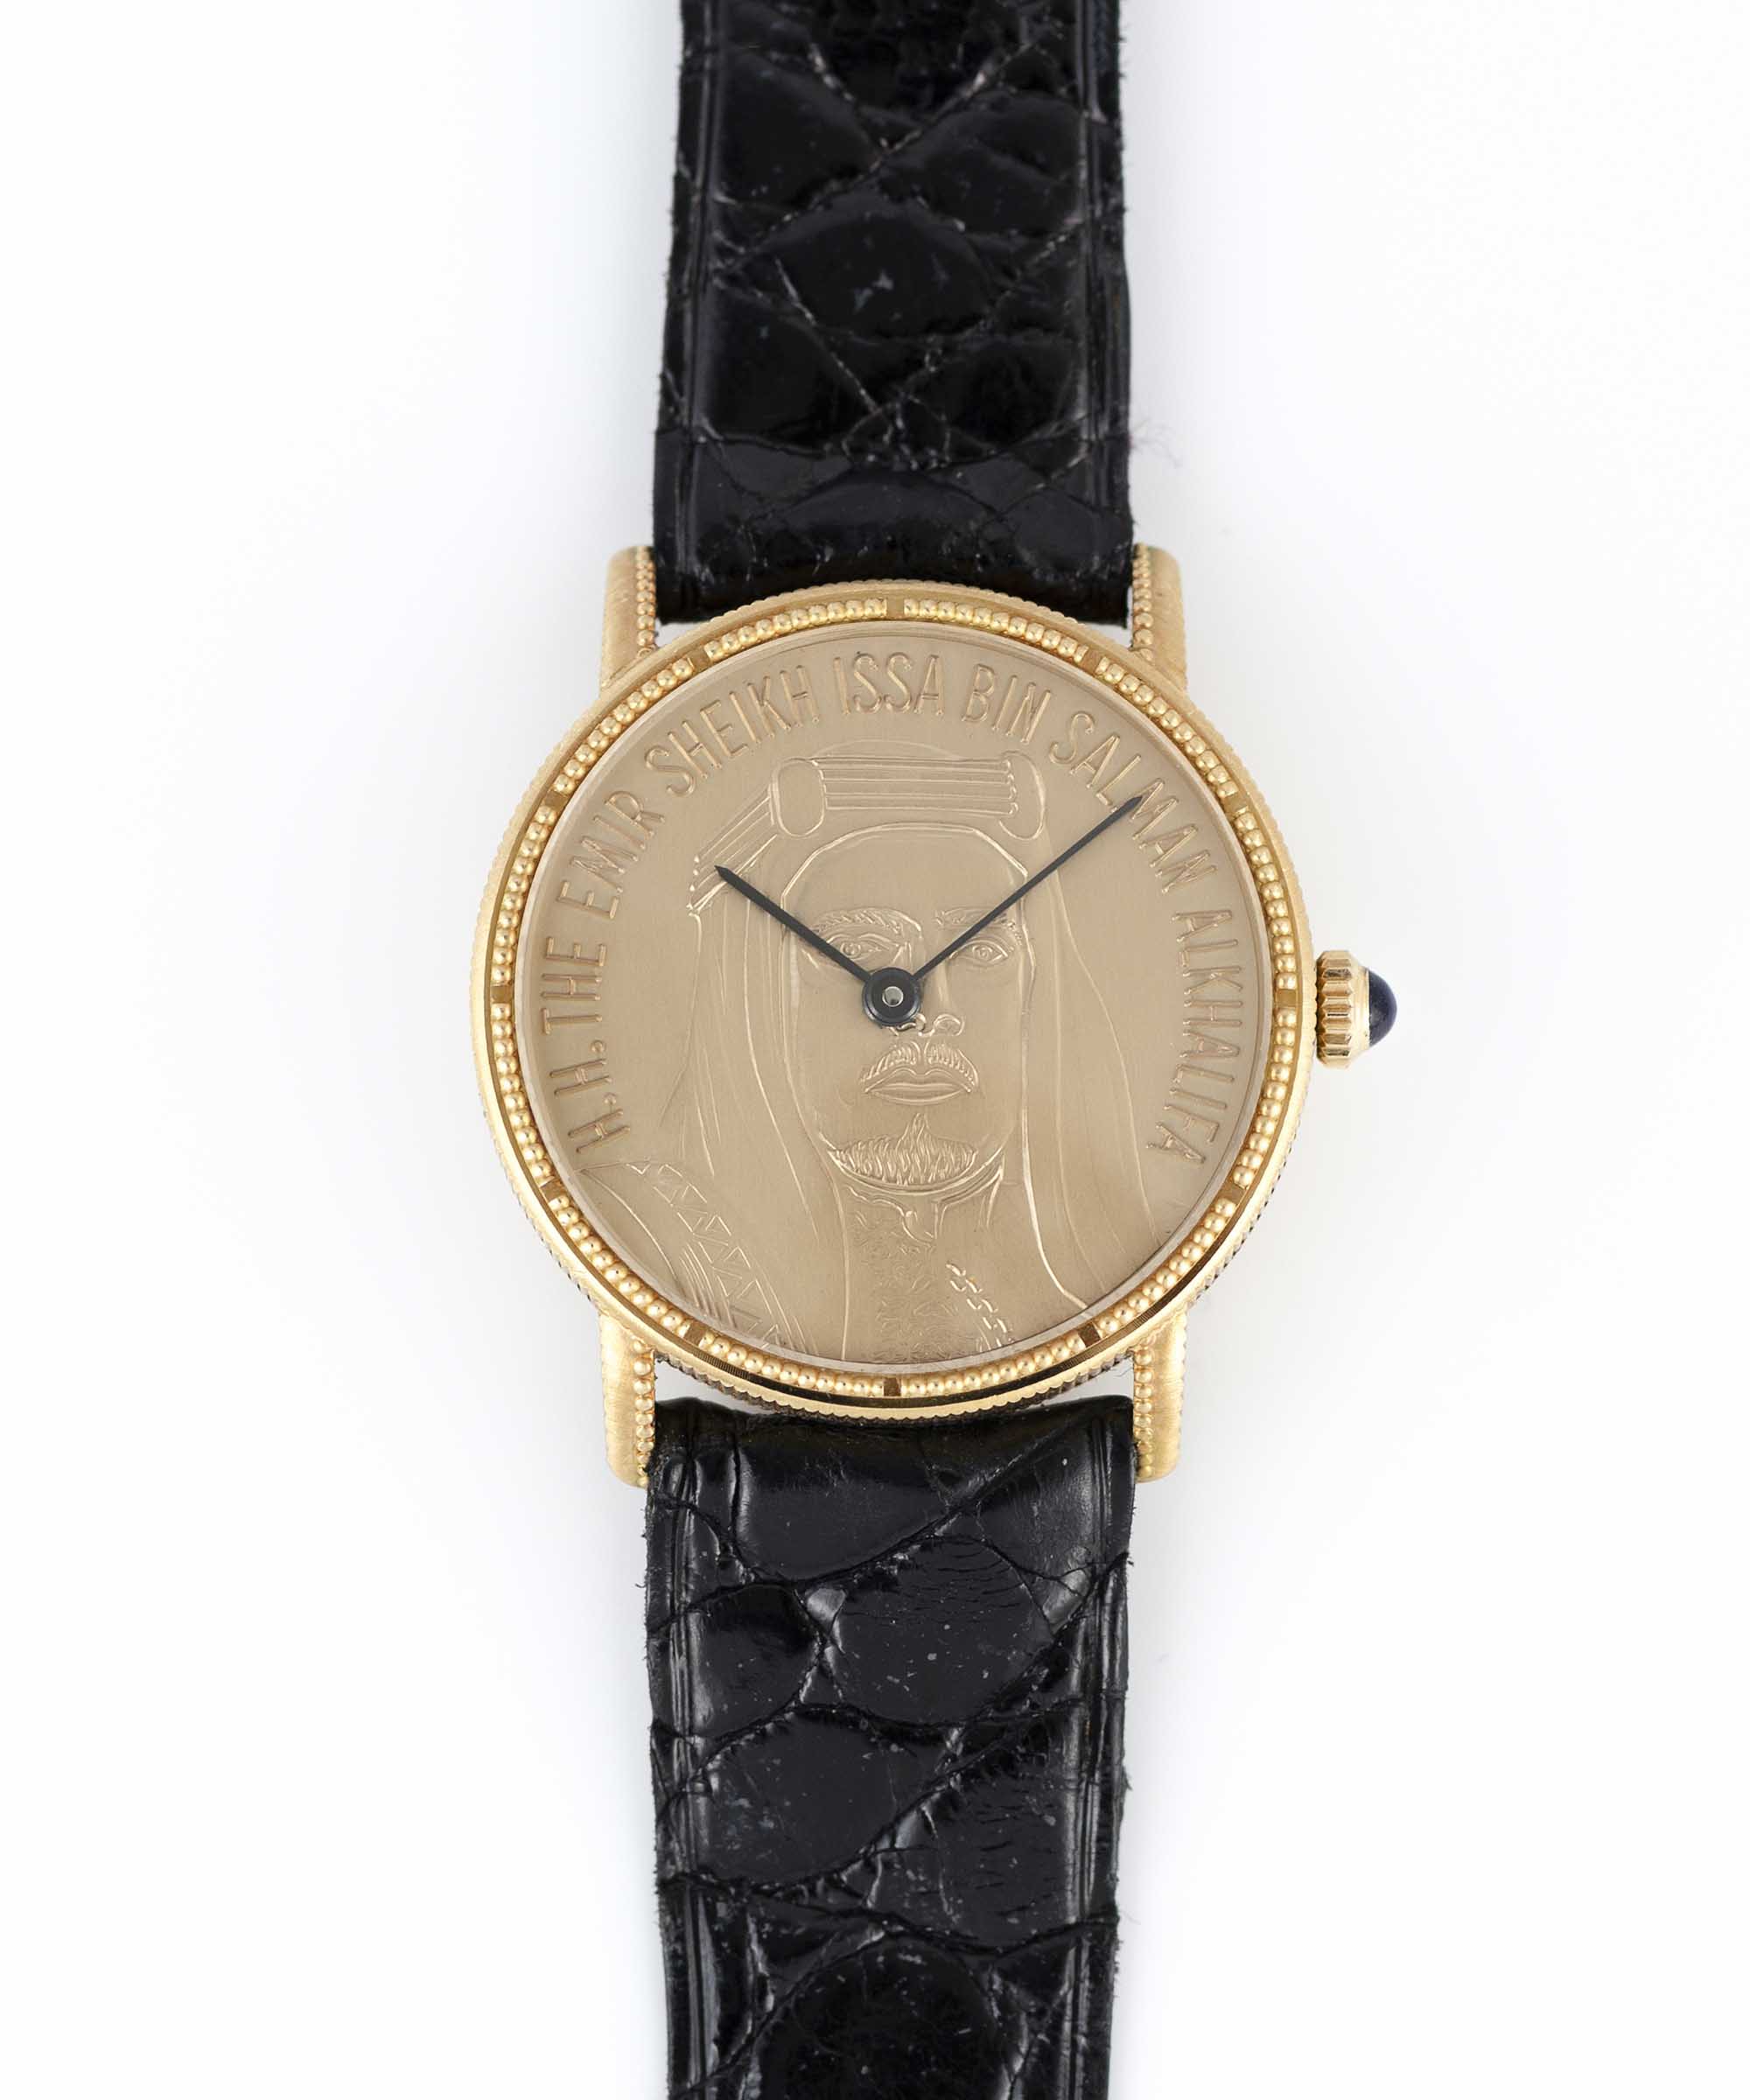 A GENTLEMAN'S 18K SOLID GOLD BAUME & MERCIER WRIST WATCH CIRCA 1980s,  REF. 35102 COMMISSIONED BY